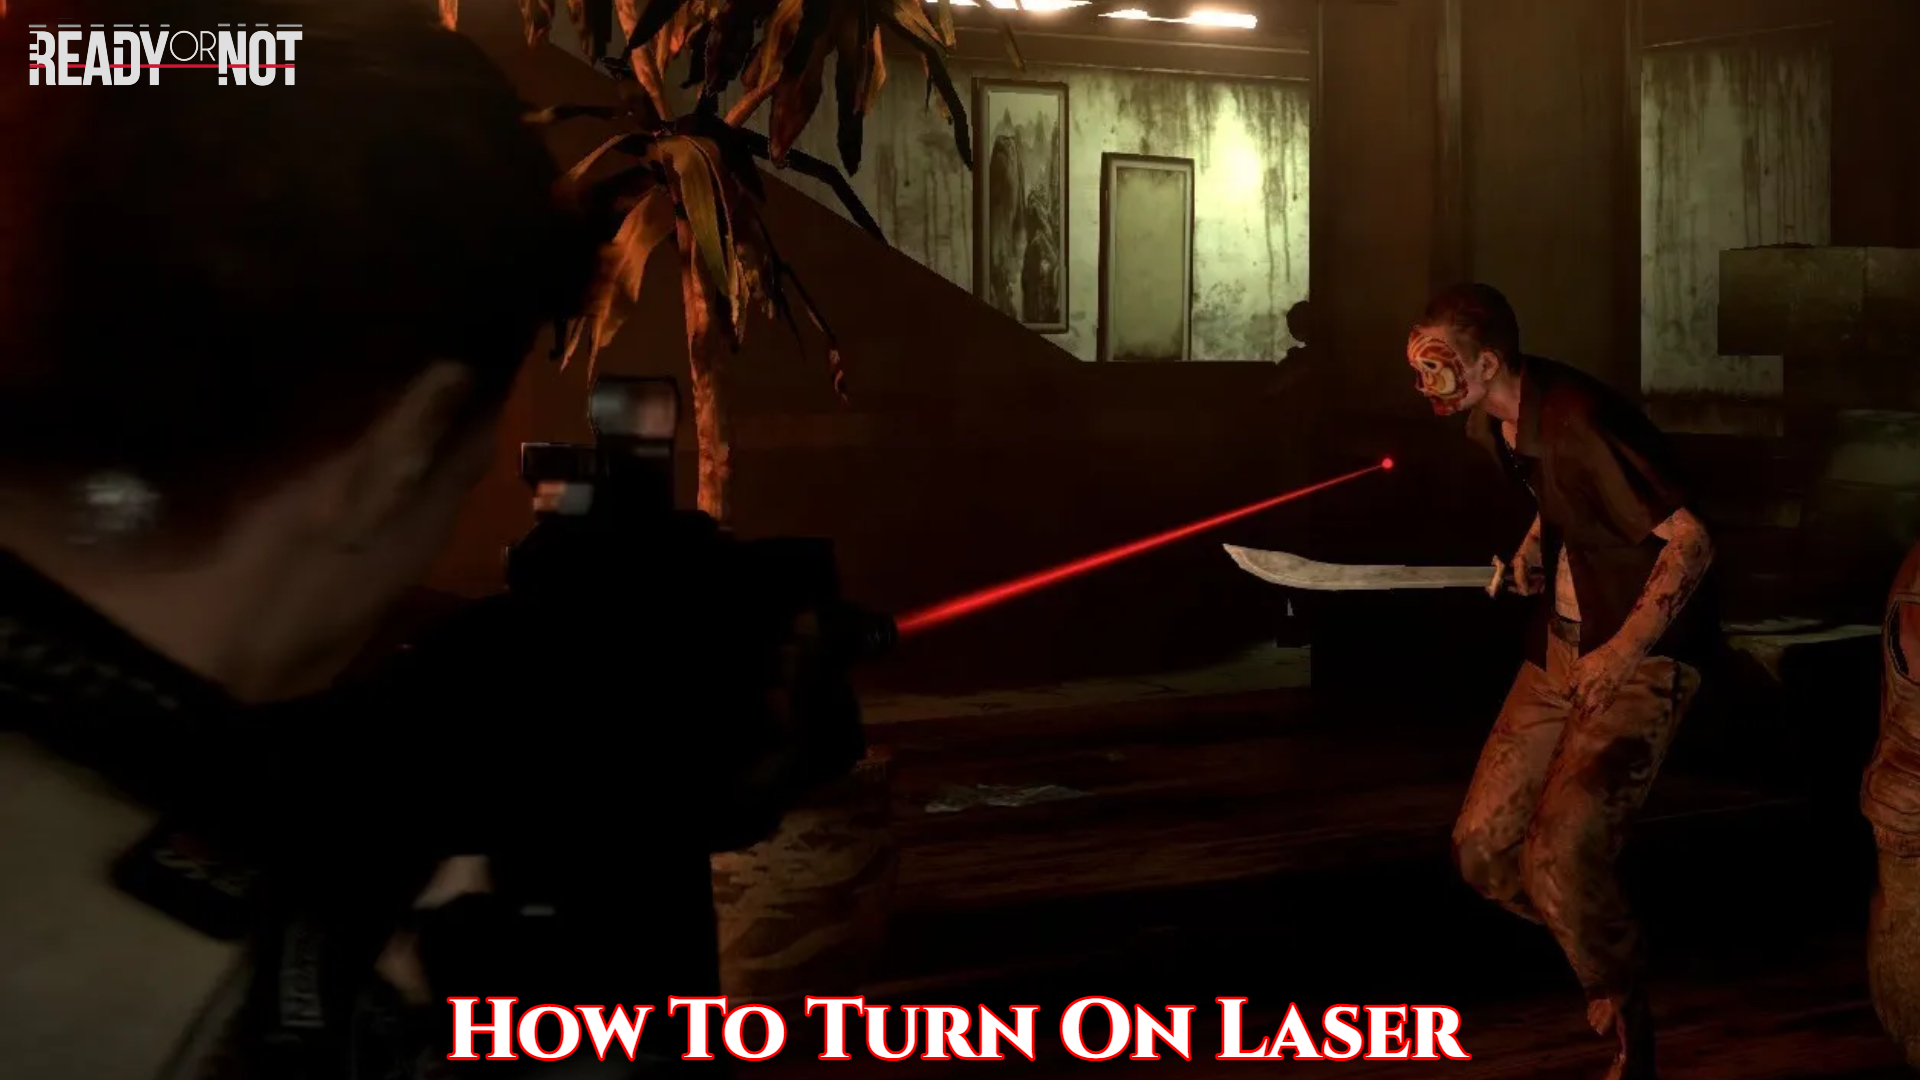 You are currently viewing How To Turn On Laser In Ready Or Not